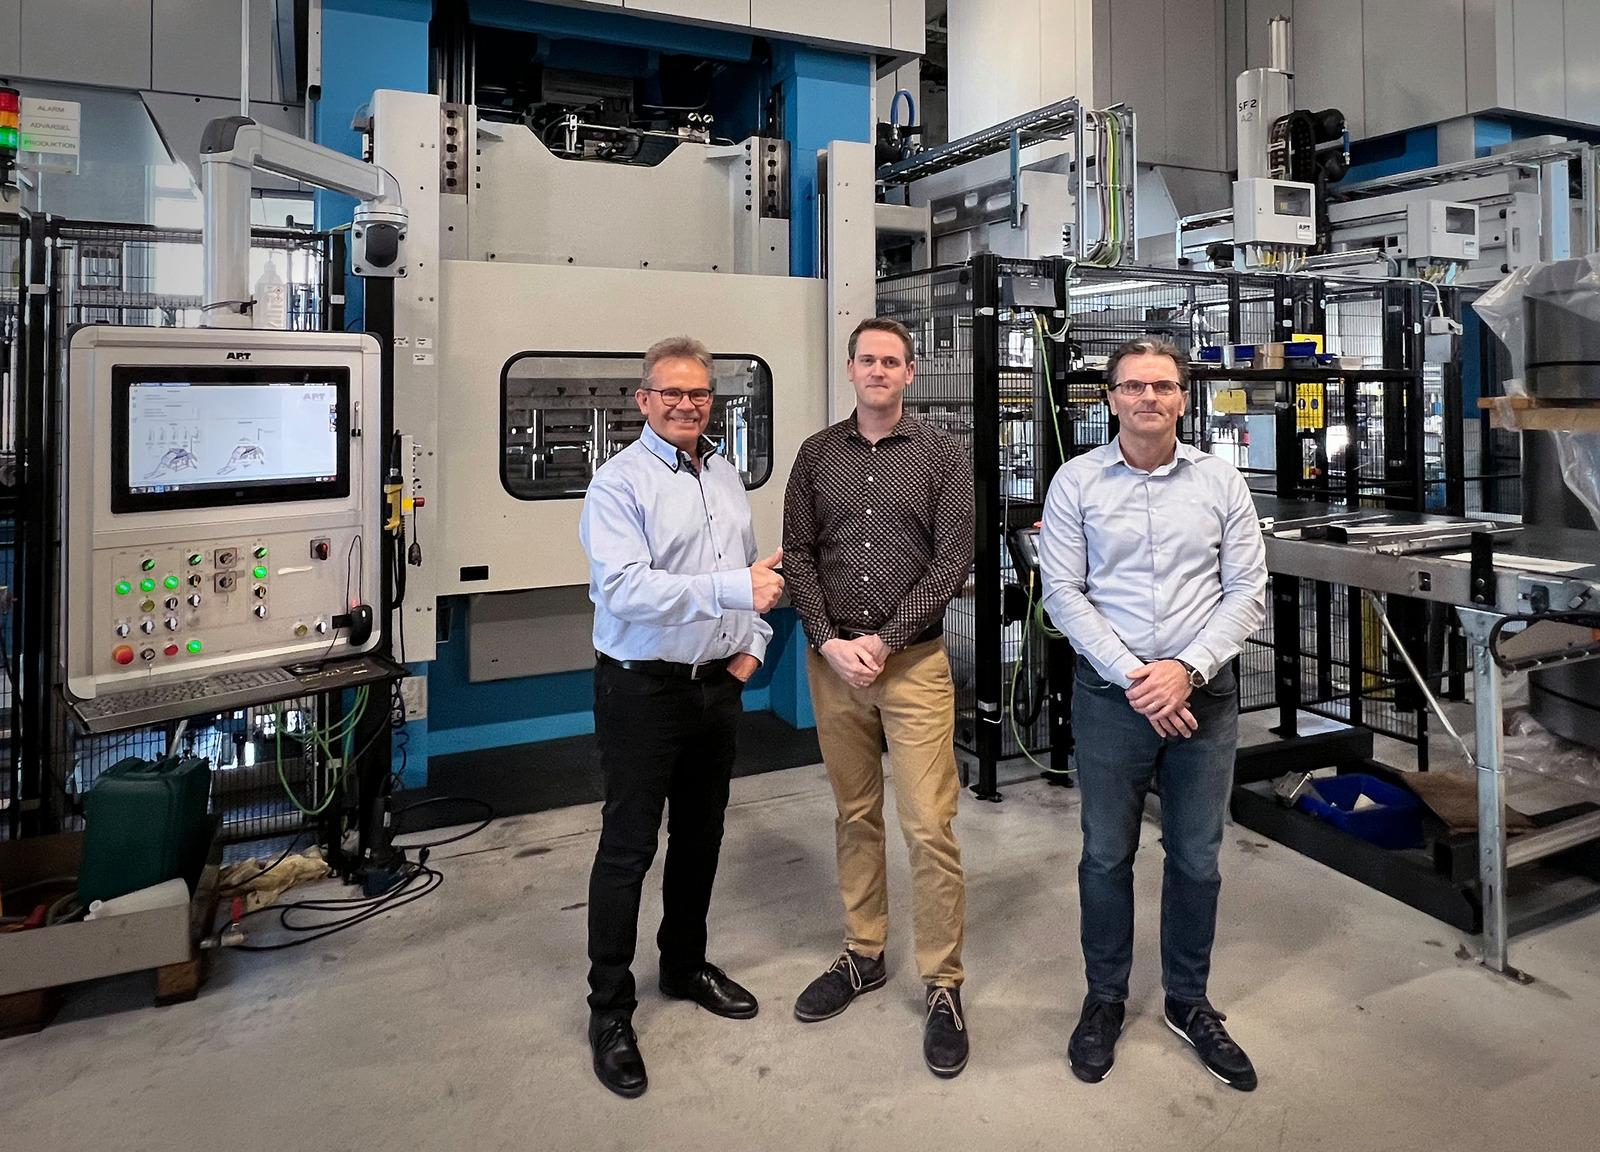 Mekoprint Mechanics in Aalborg, Denmark is increasing their manufacturing capacity with yet another production line from AP&T. From the left, Peter Karlsson, AP&T, with Mekoprint Mechanics’ Technology & Product Manager, Karsten J. Møller and Division Director, Søren Holmboe.